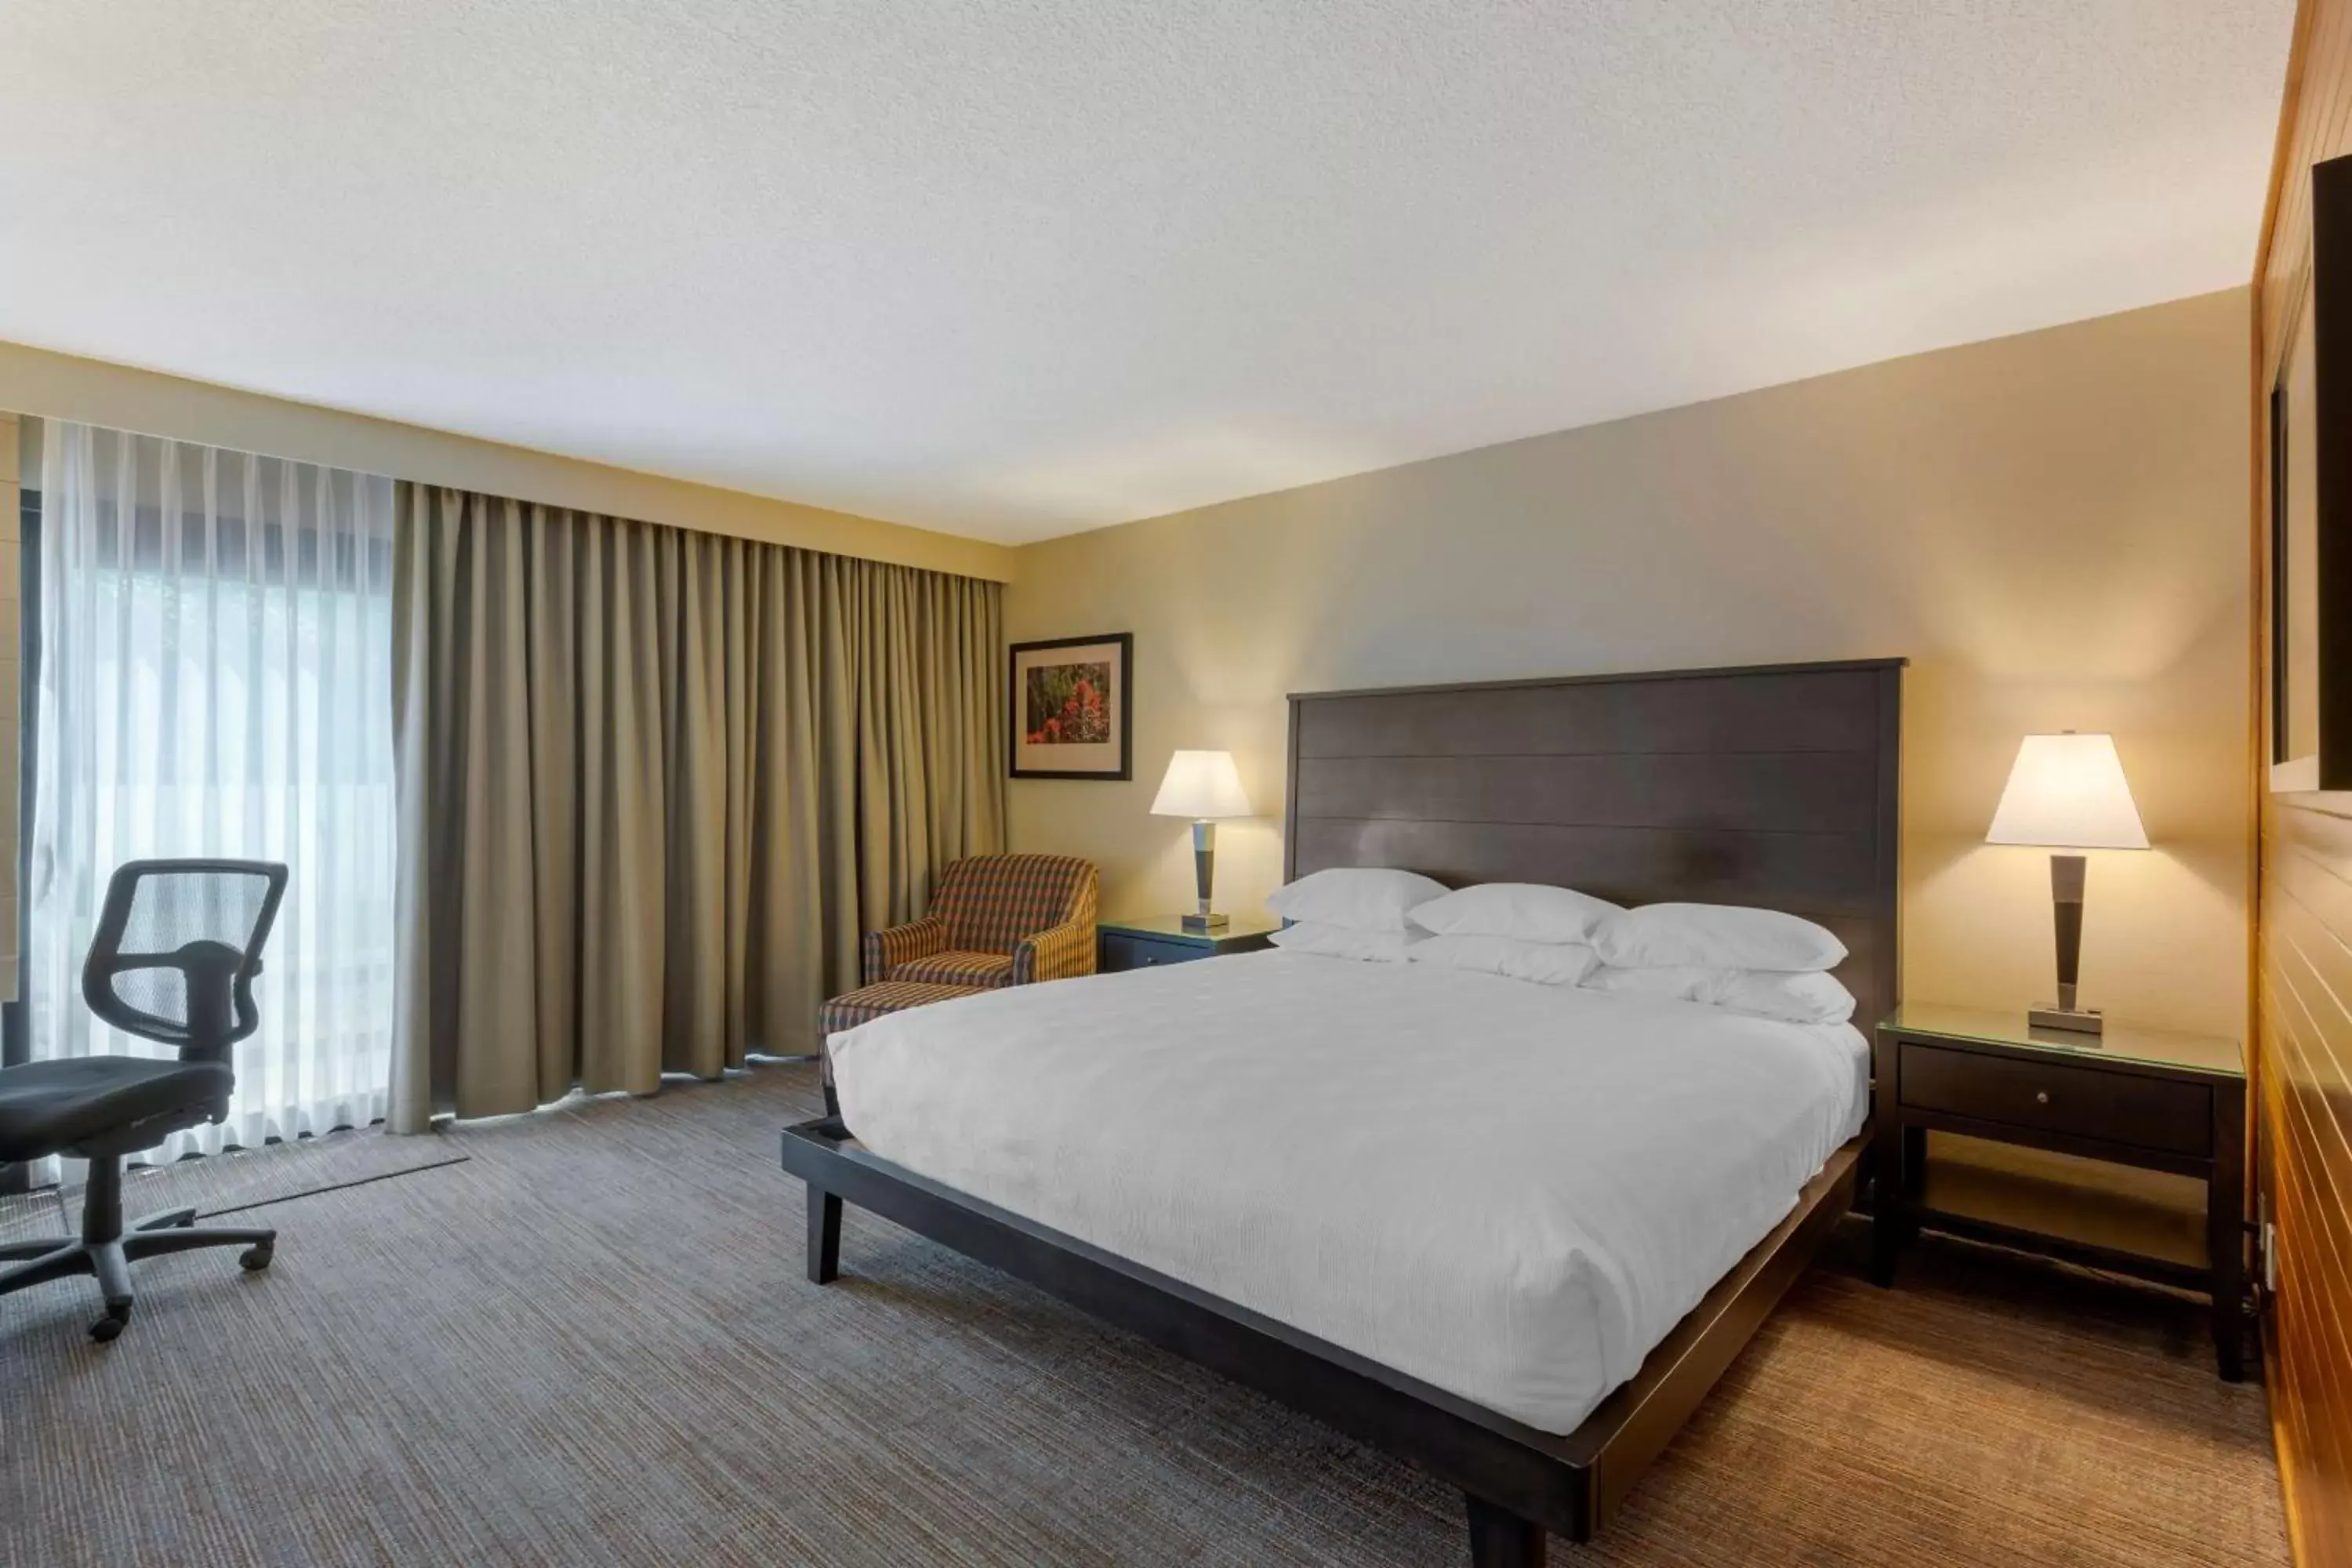 Deluxe King Room with River View, Pet Friendly by Request in Best Western Plus Hood River Inn